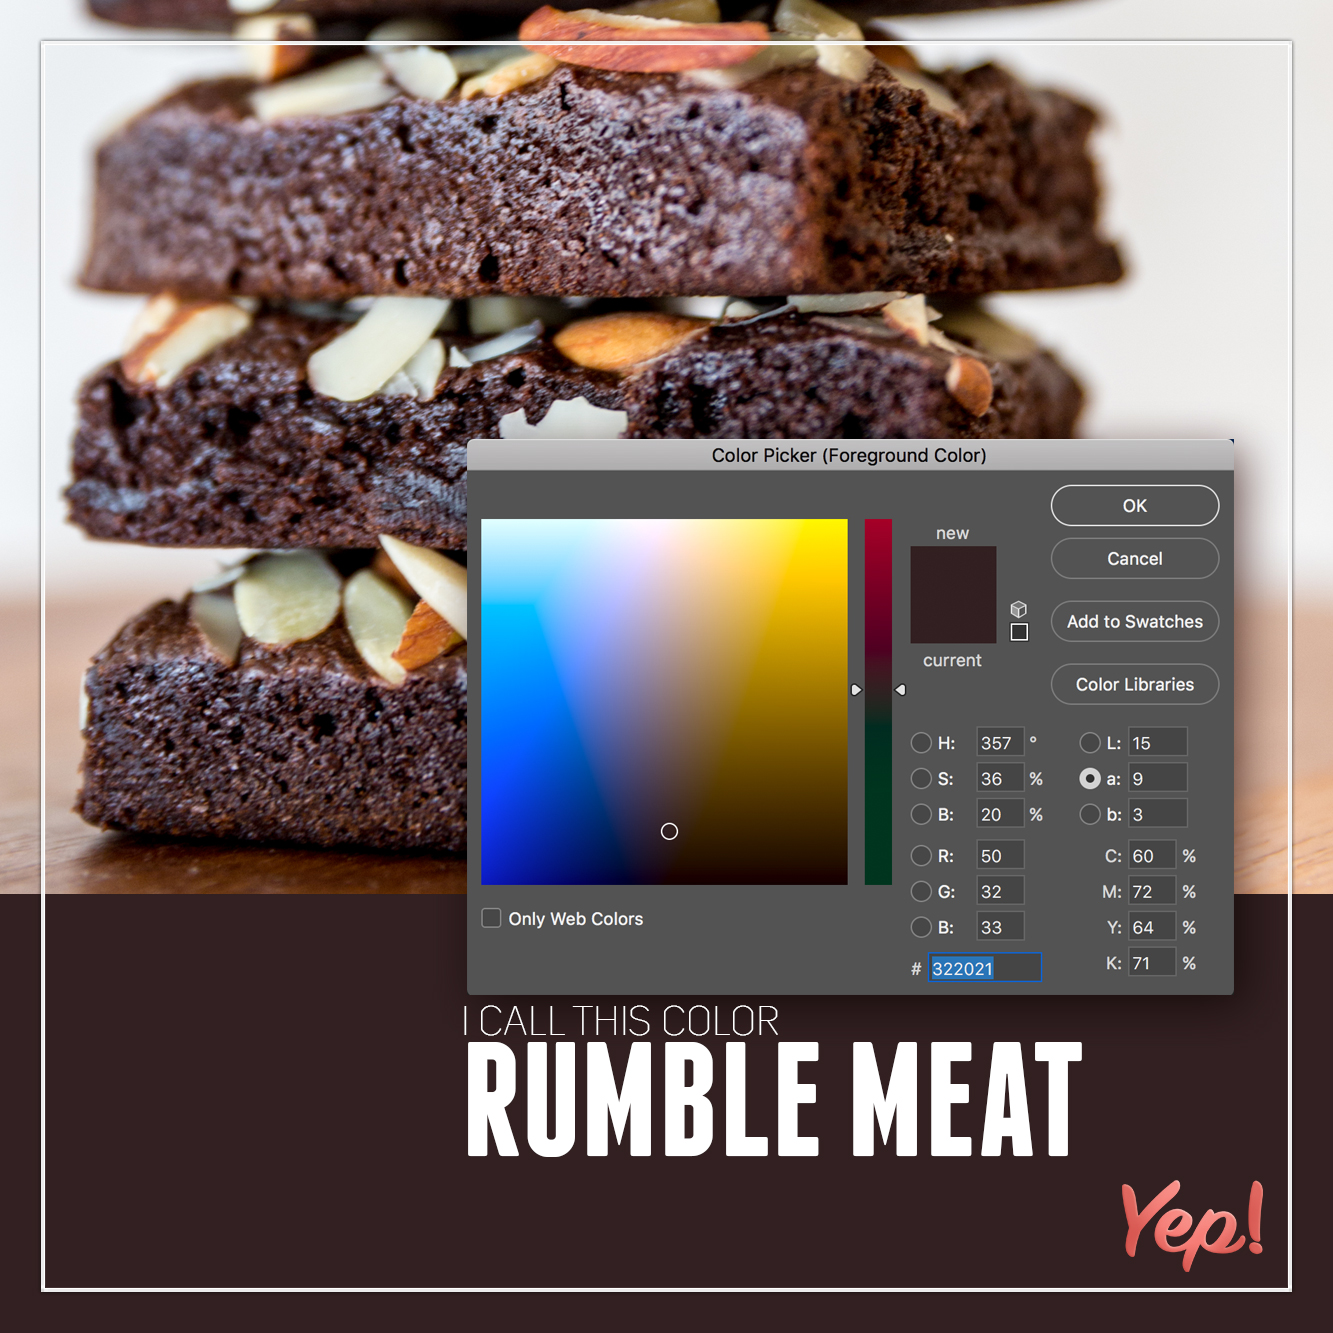 store brownies - Color Picker Foreground Color Ok Cance Add to Swatches Color Ubraries 357. L 15 35 O2 2003 Ordo C60 G 32 M 72 136 323021 K K % Only Web Colors I Call This Color Rumble Meat Yep!